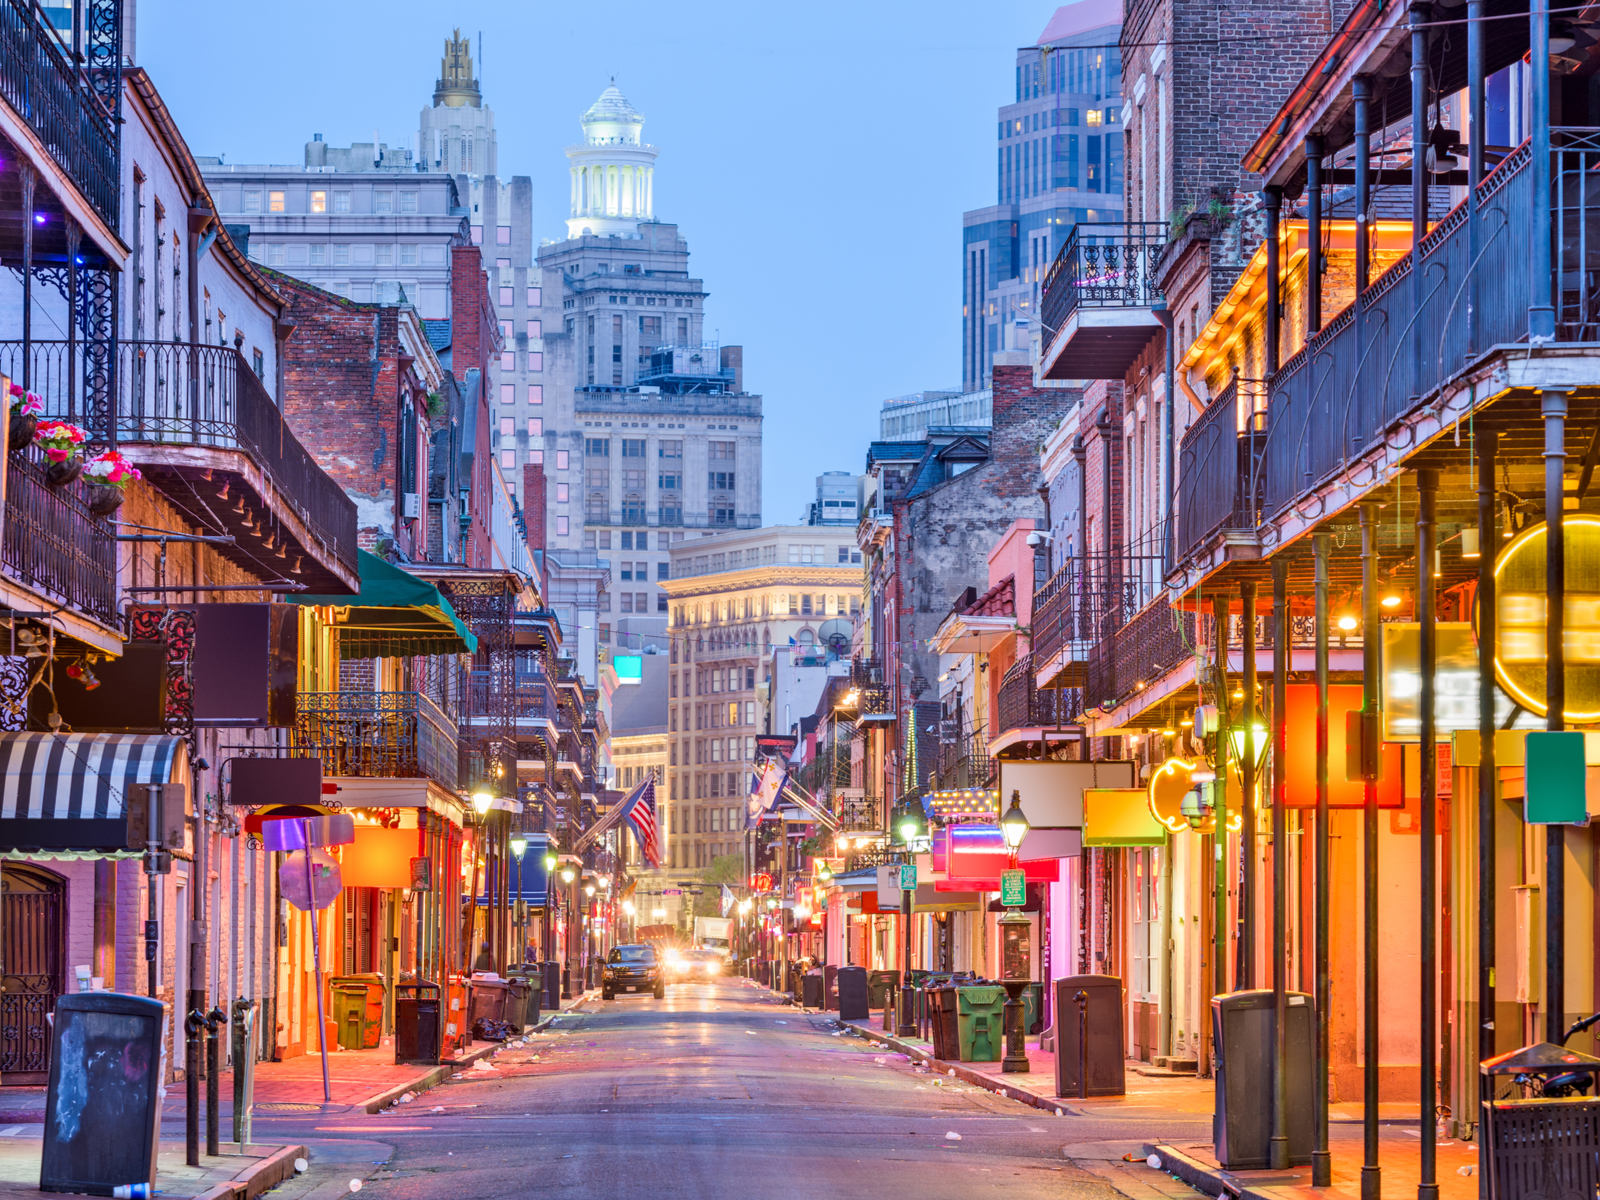 The Bourbon St with lit stores and bars during dusk at New Orleans in Louisiana, considered one of the most beautiful cities in the US